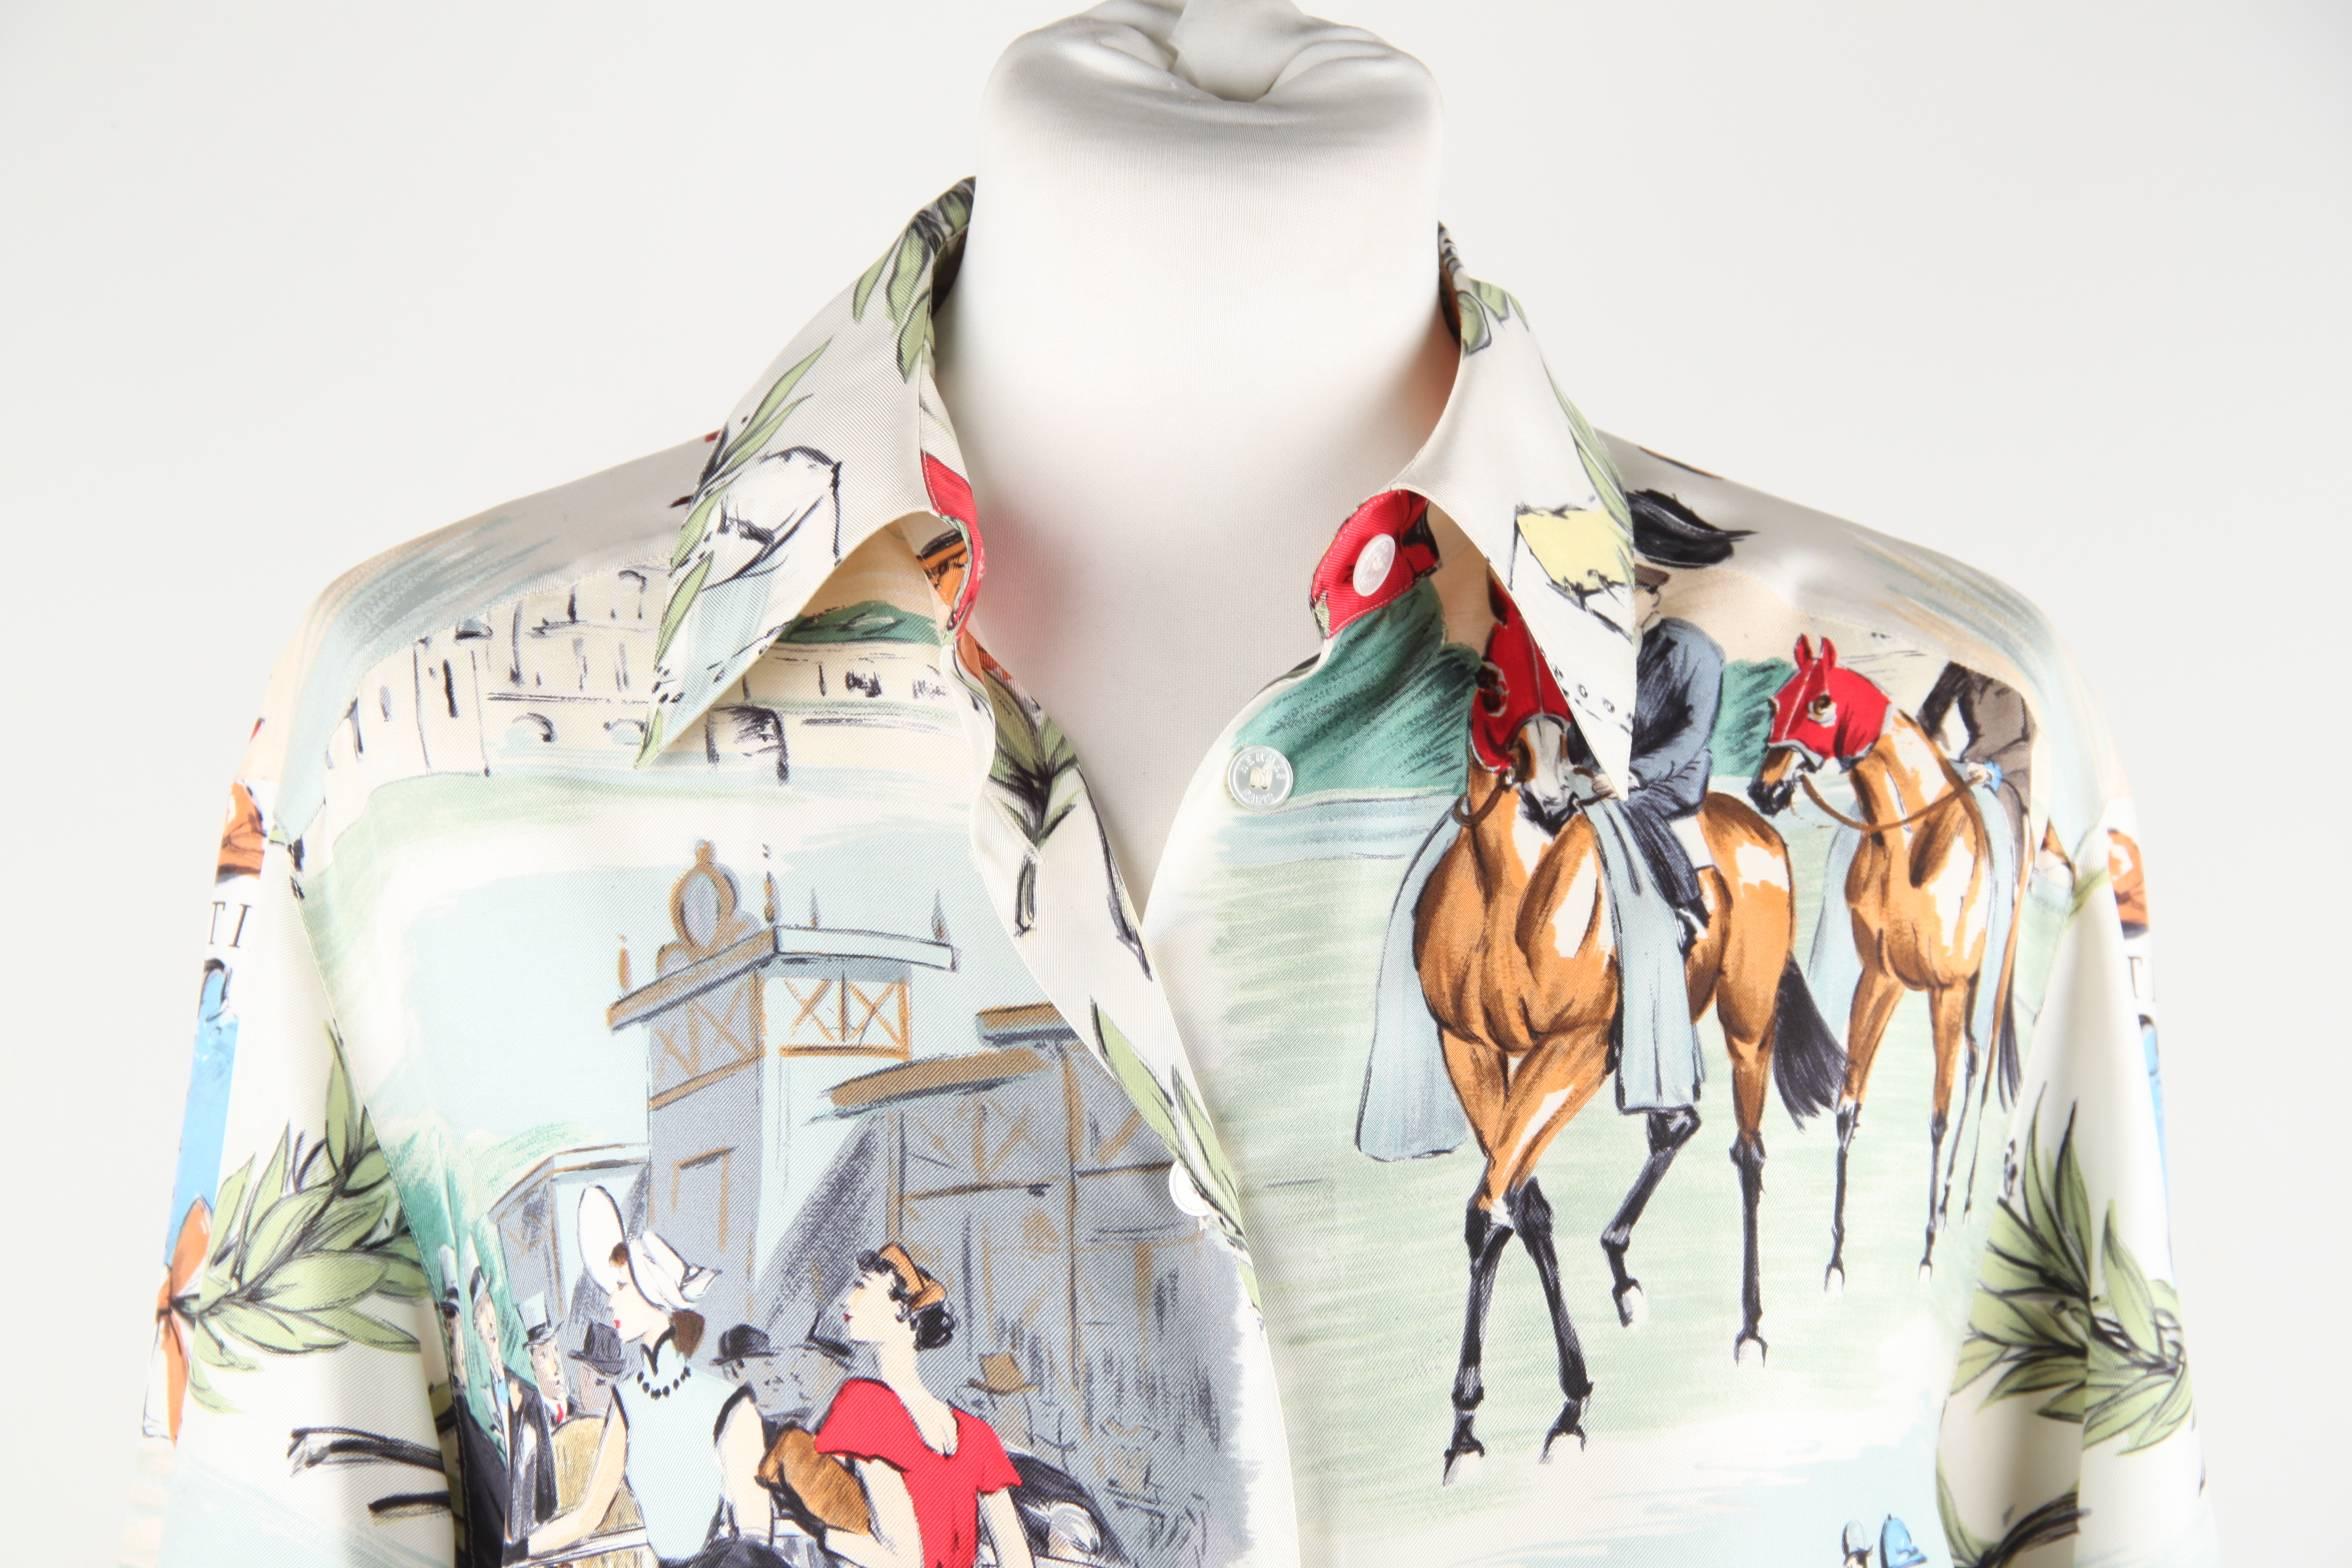 - 'COURSES A CHANTILLY' design by Maurice Taquoy - First issued as a scarf in the early 1950s 